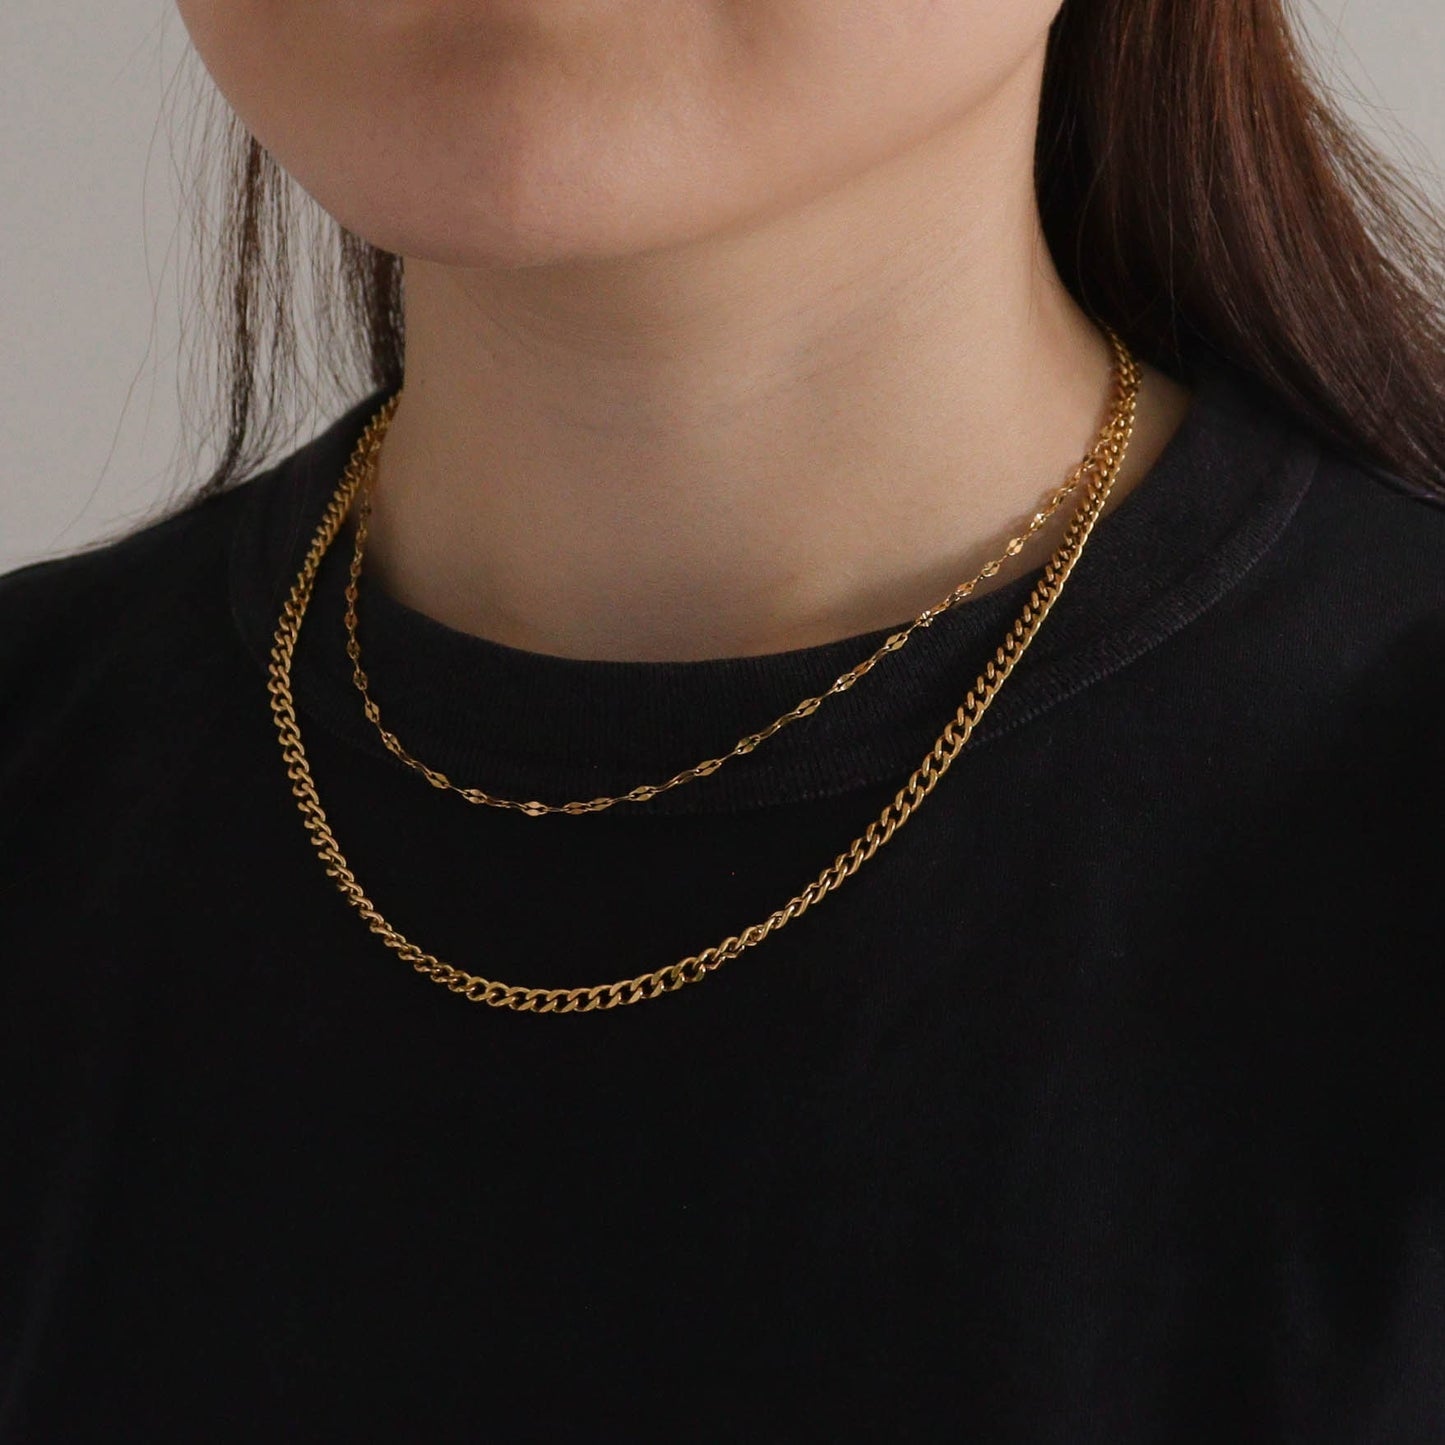 Mouth Lip Chain Necklace